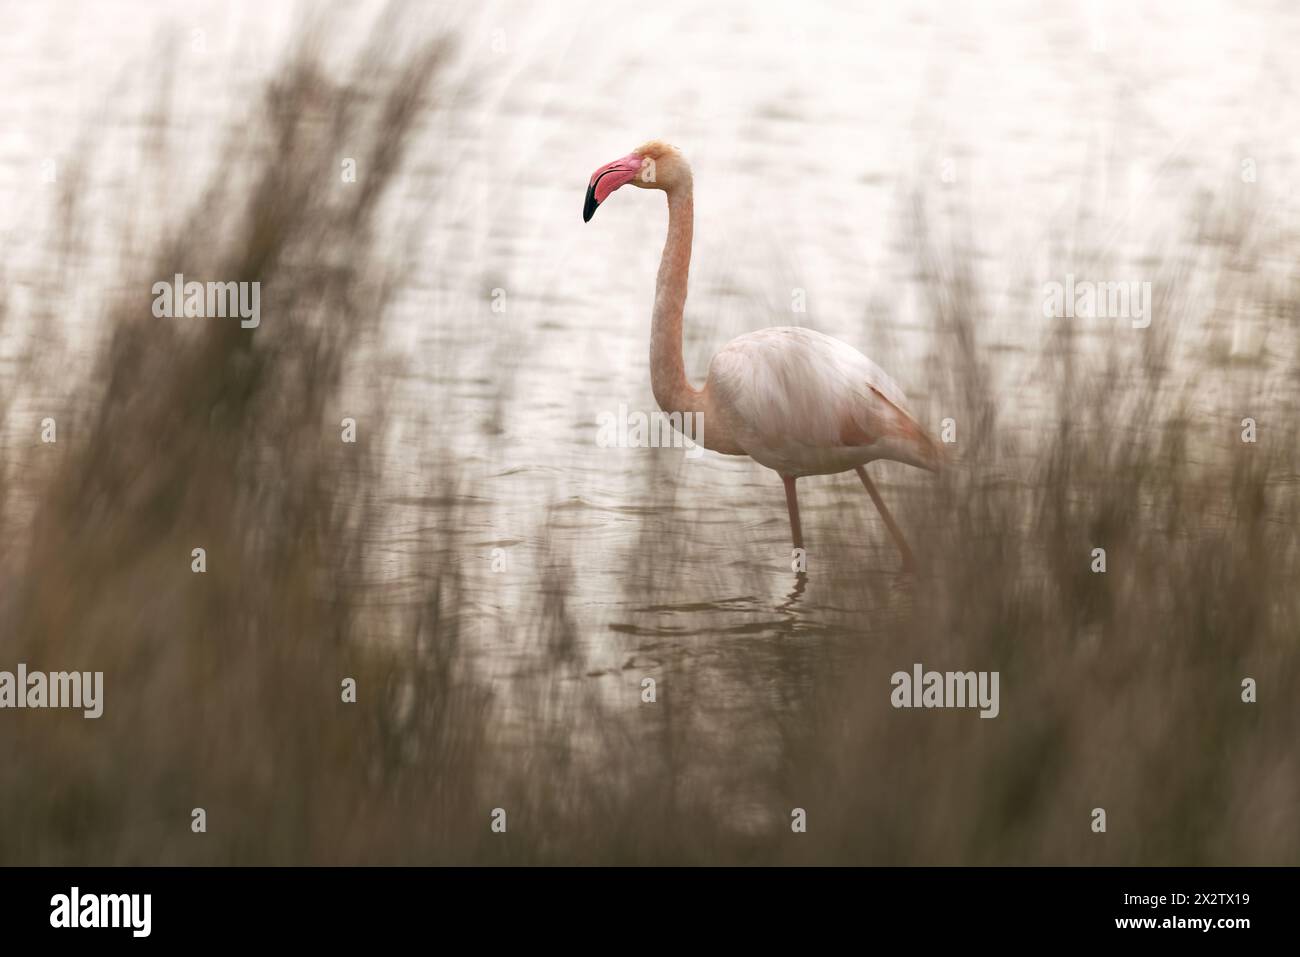 Wild flamingos (Phoenicopteridae) at the Camargue, france, europe in early spring outdoors. Wildlife birdwatching Stock Photo